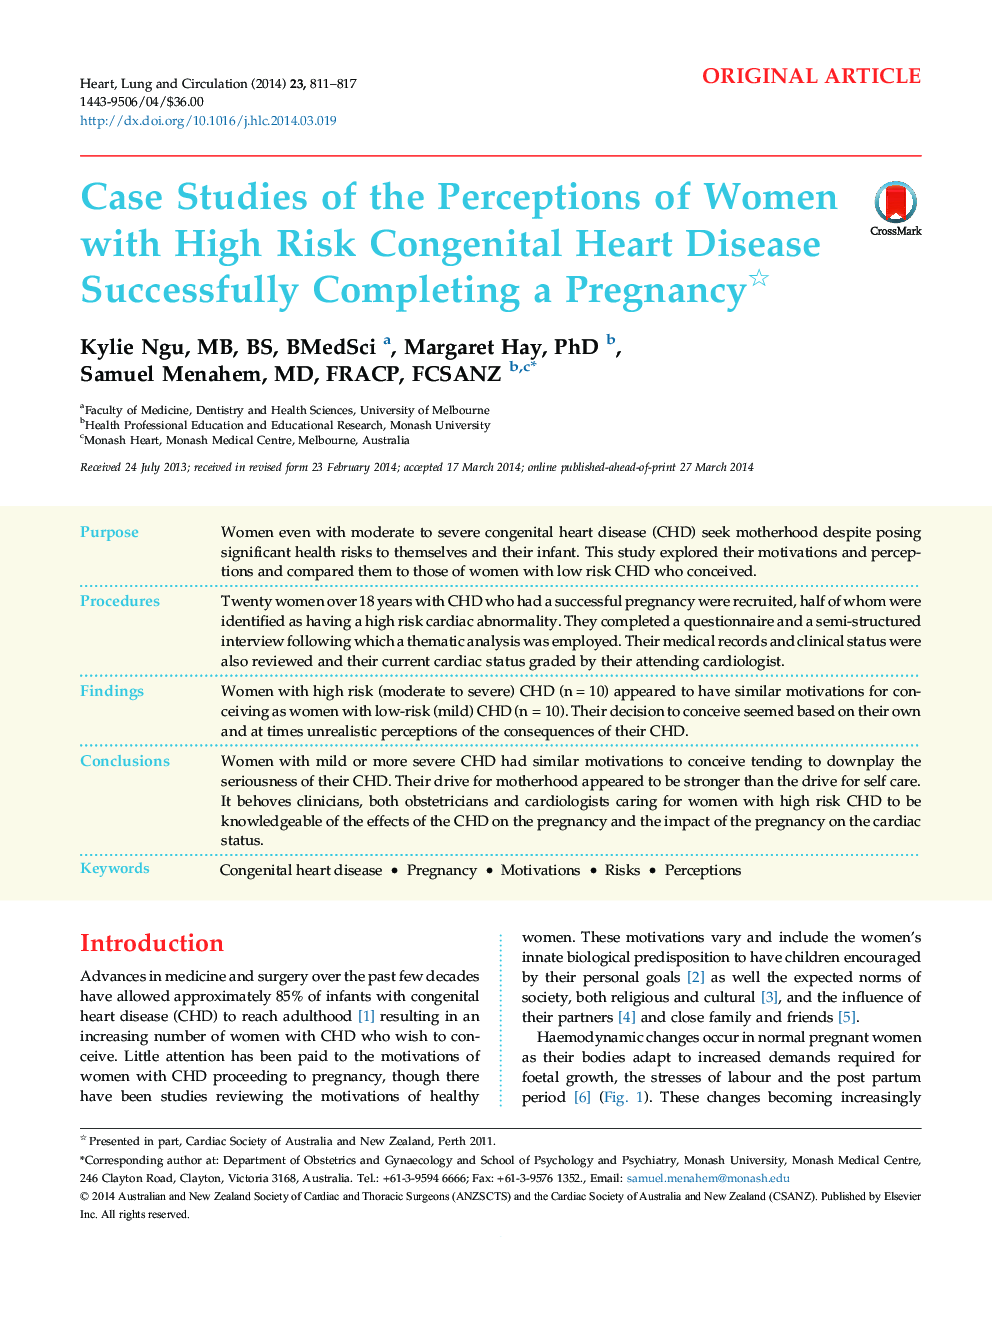 Case Studies of the Perceptions of Women with High Risk Congenital Heart Disease Successfully Completing a Pregnancy 